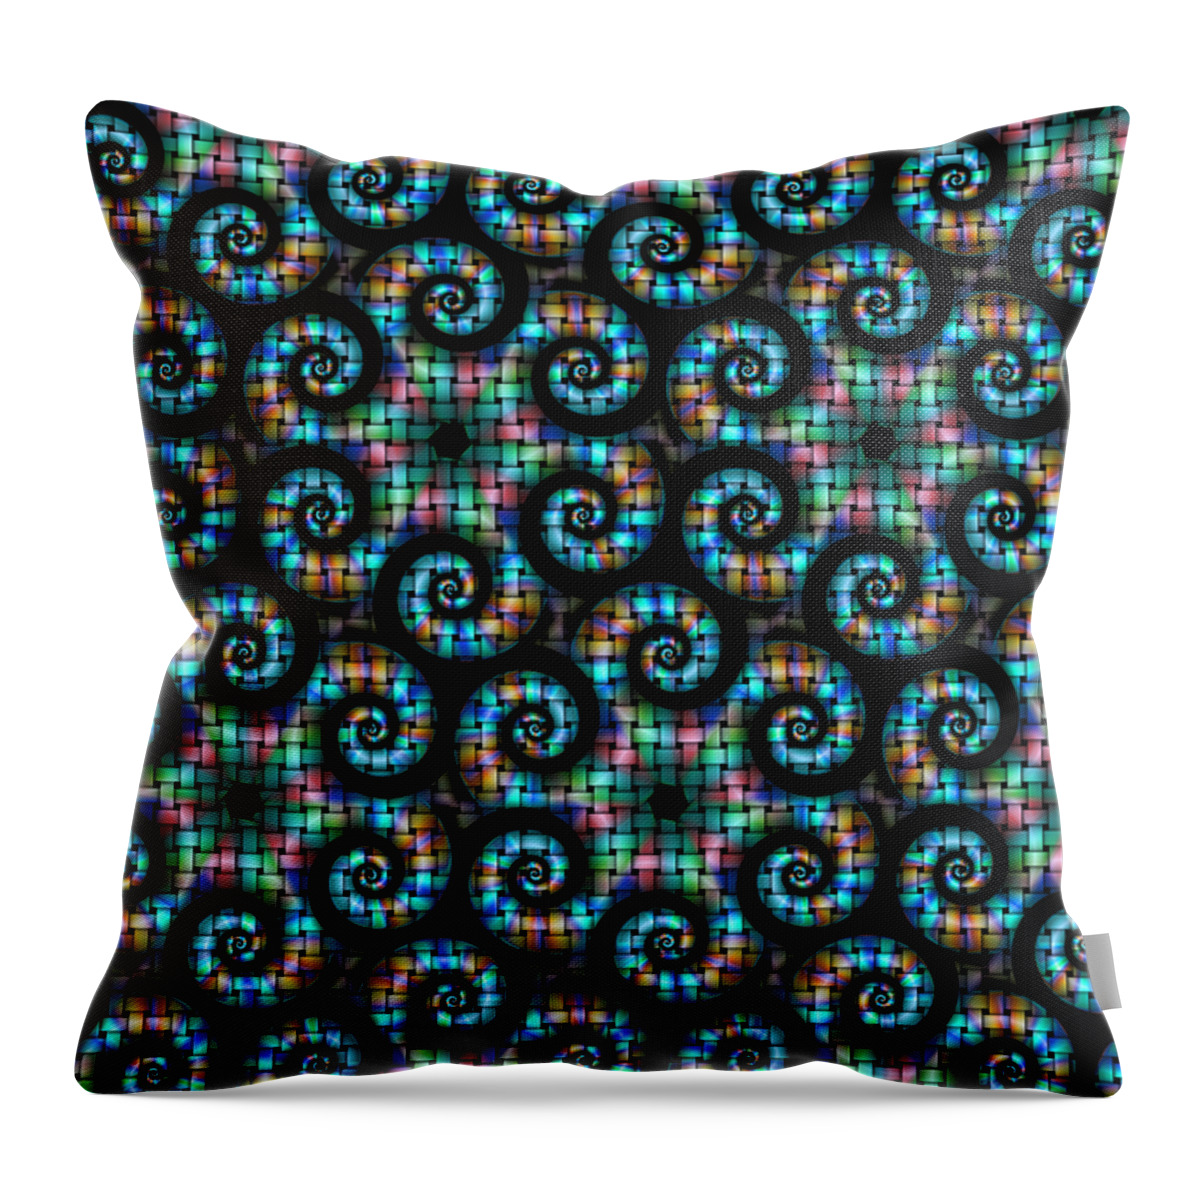 Abstract Throw Pillow featuring the digital art Ecosystem by Manny Lorenzo